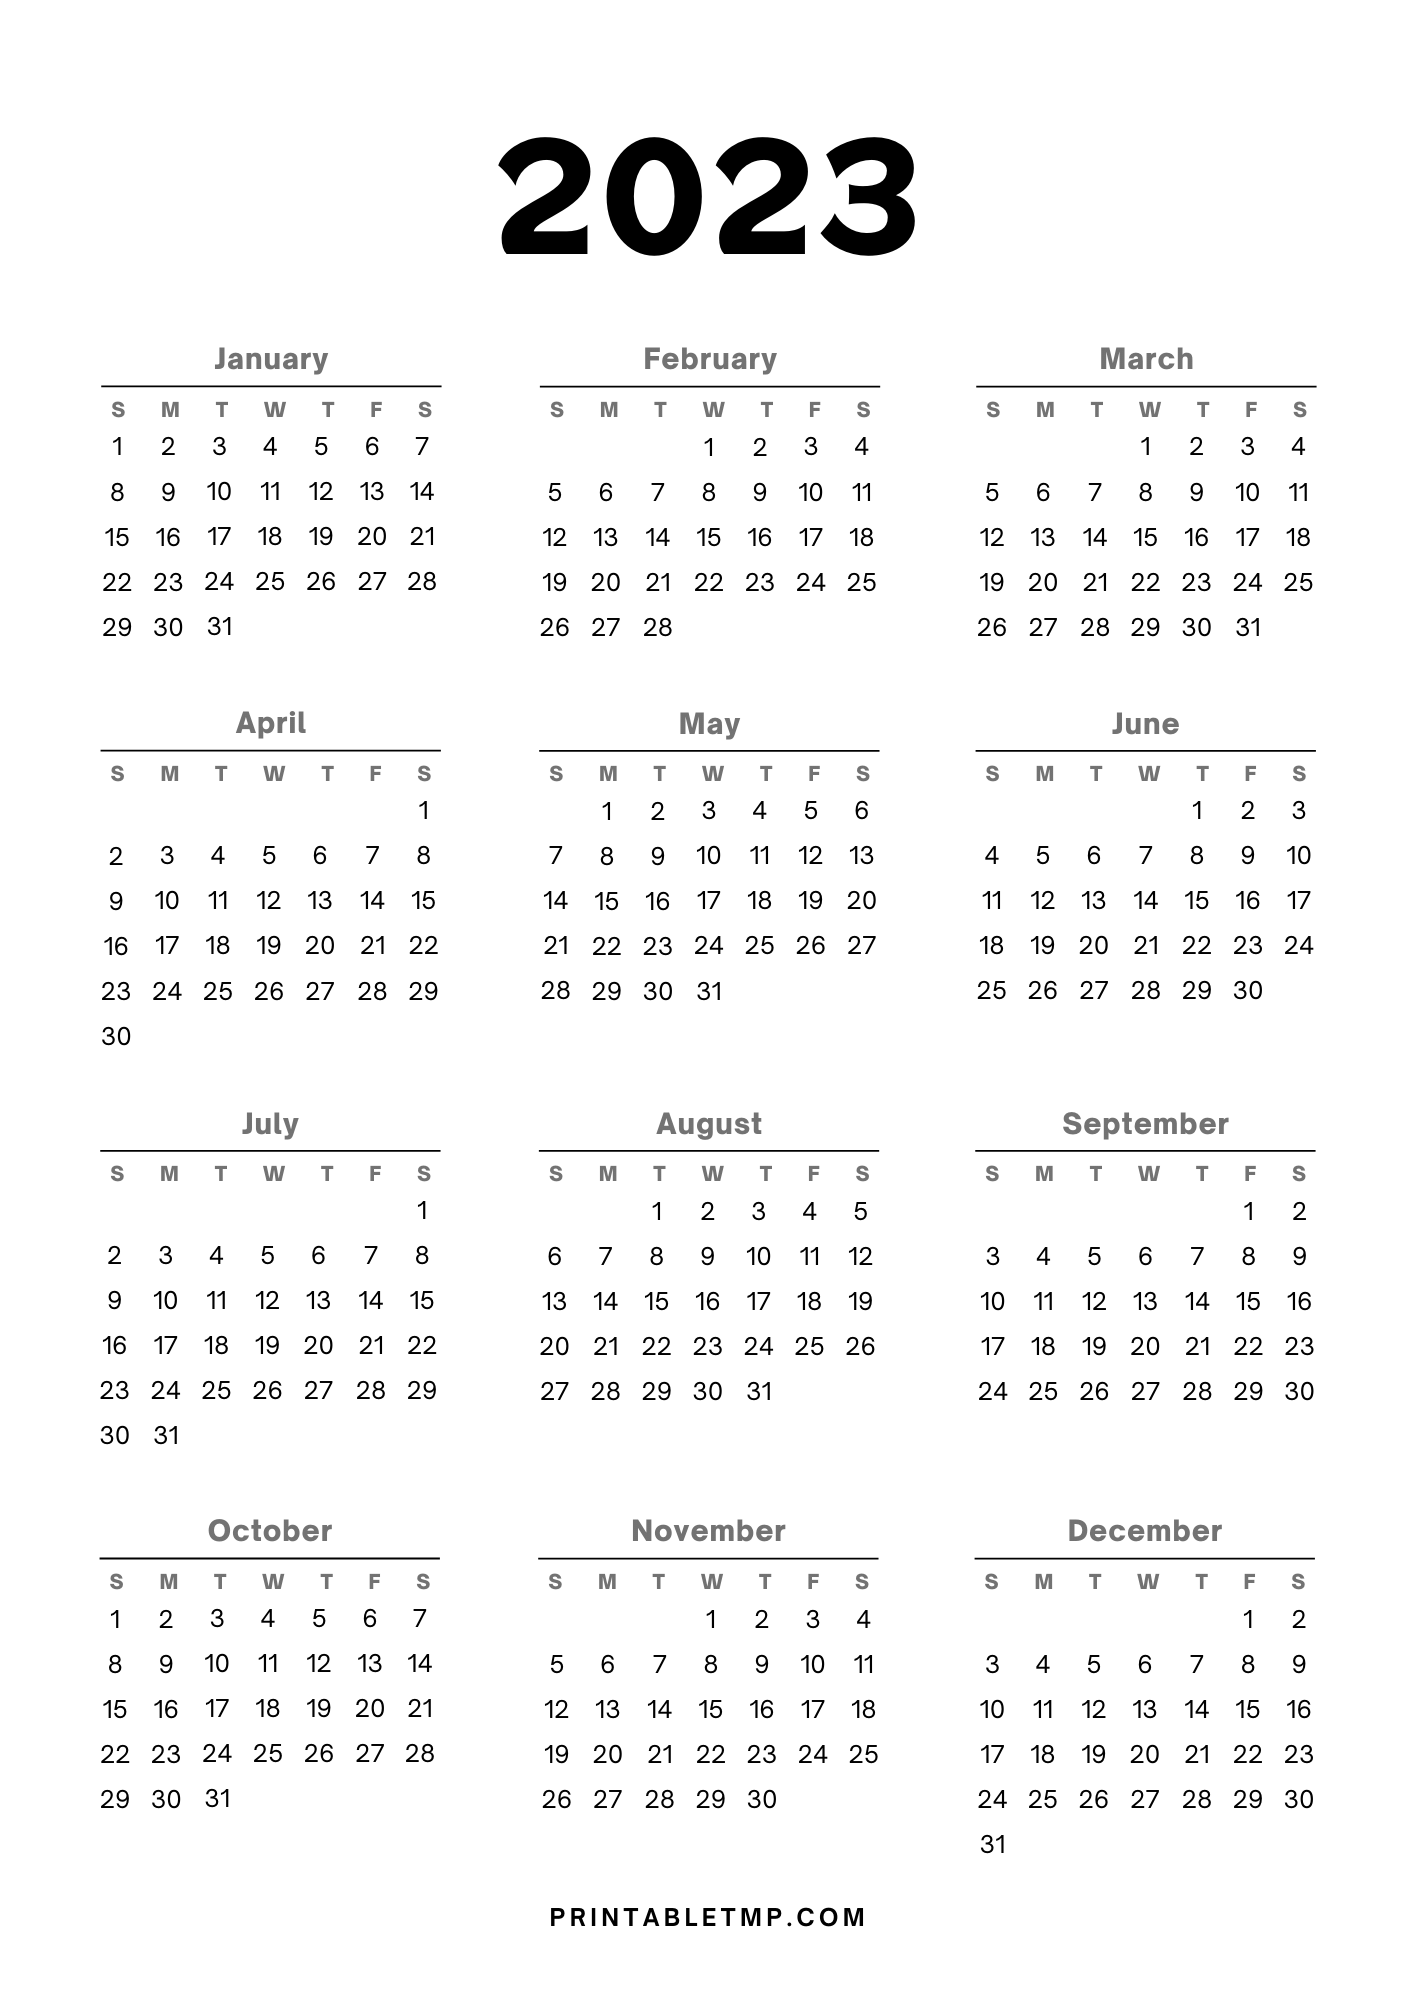 2023 Calendar Printable with USA Holidays | Yearly Planners